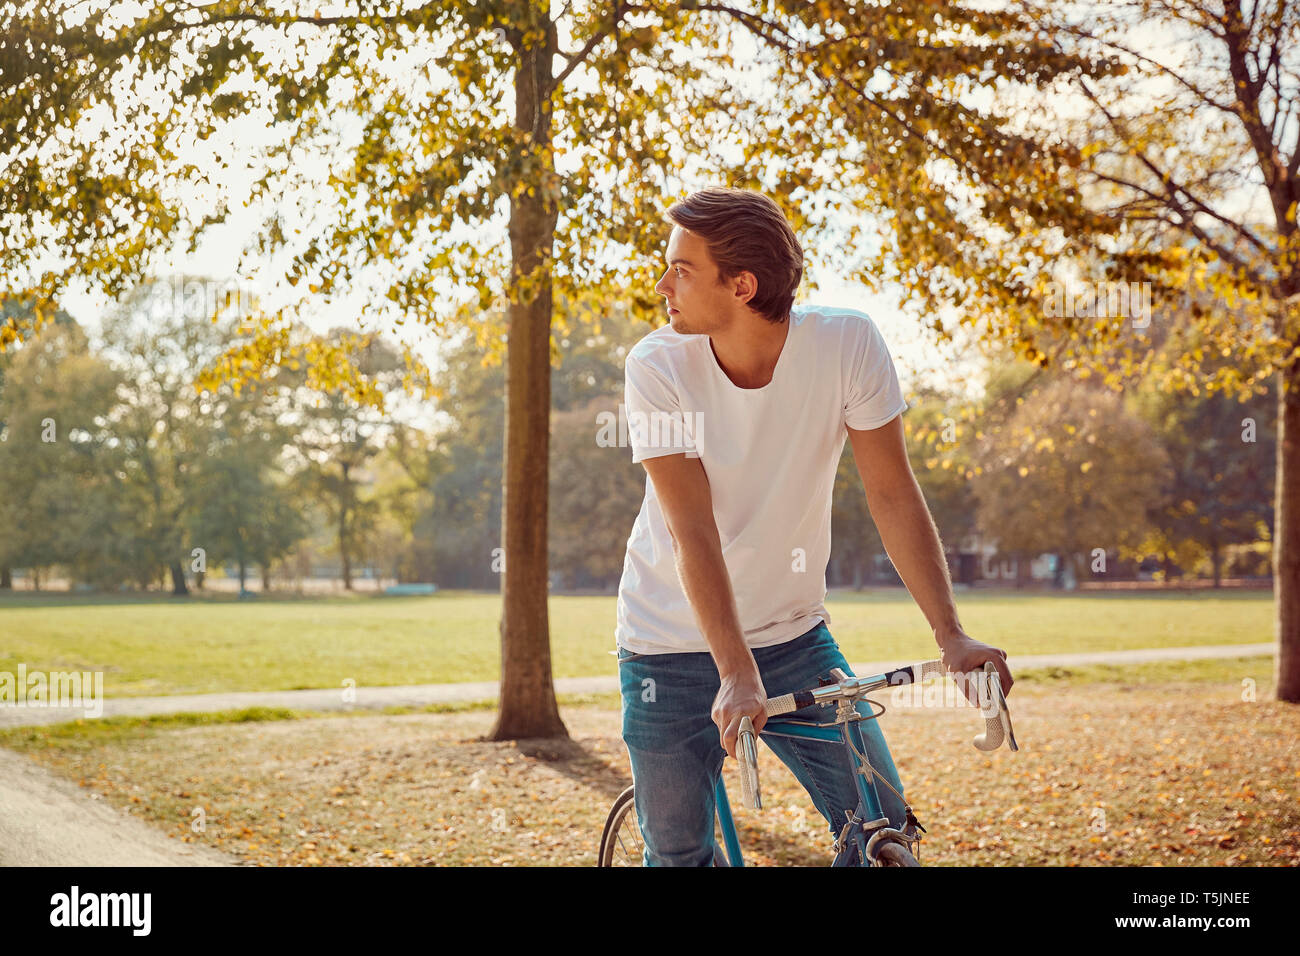 Young man with bike in park looking around Stock Photo